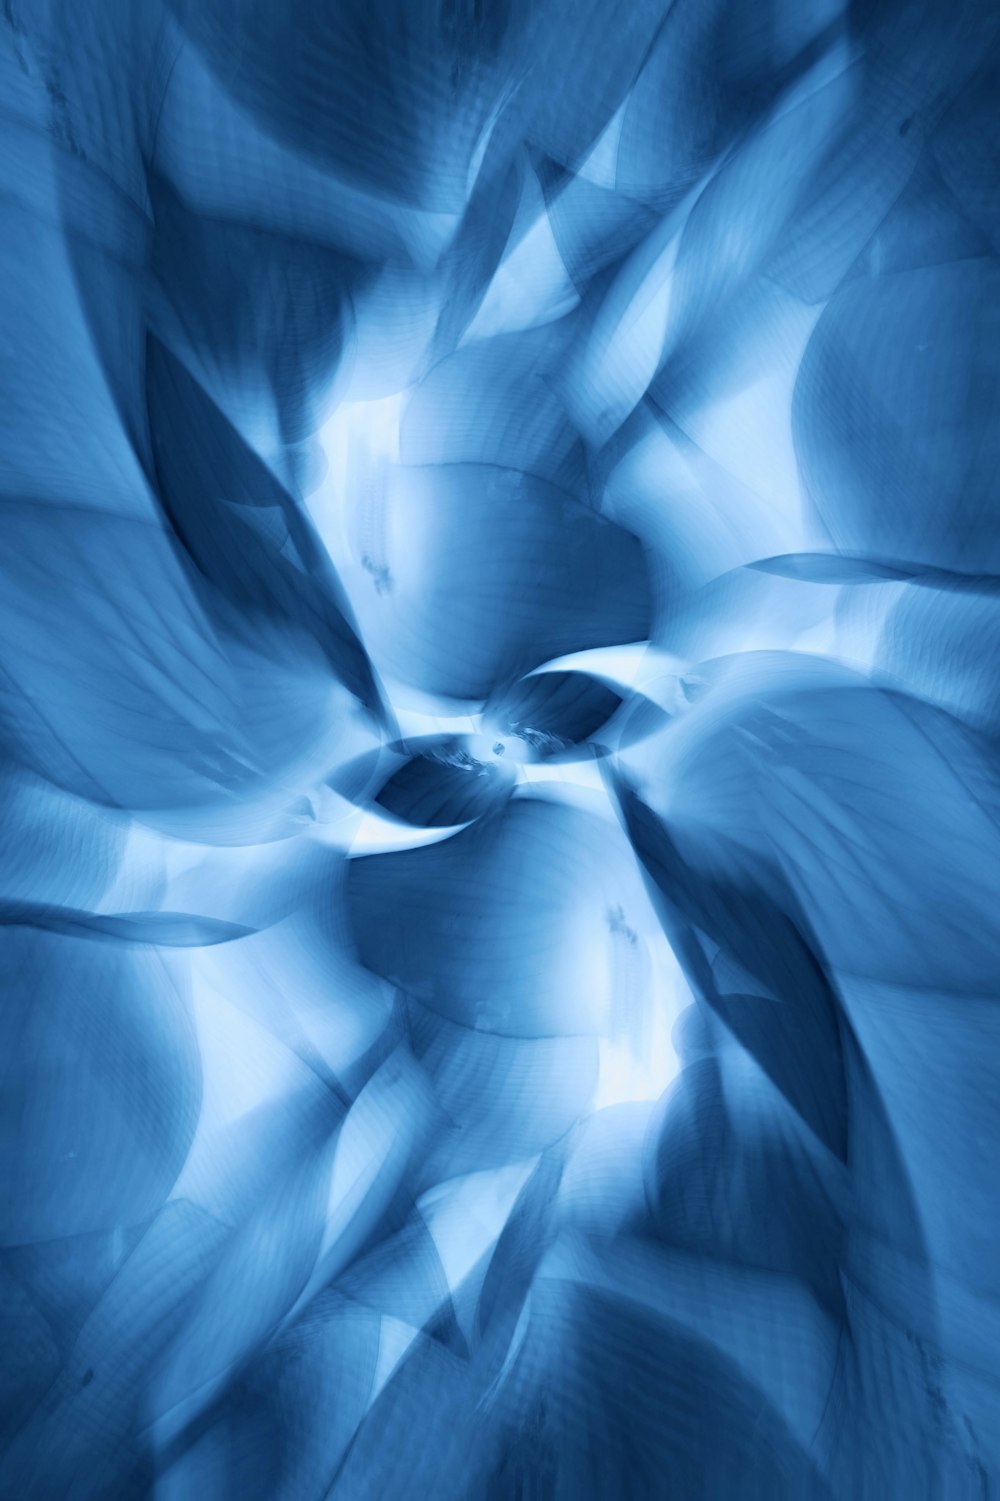 a blue flower is shown in the middle of a picture